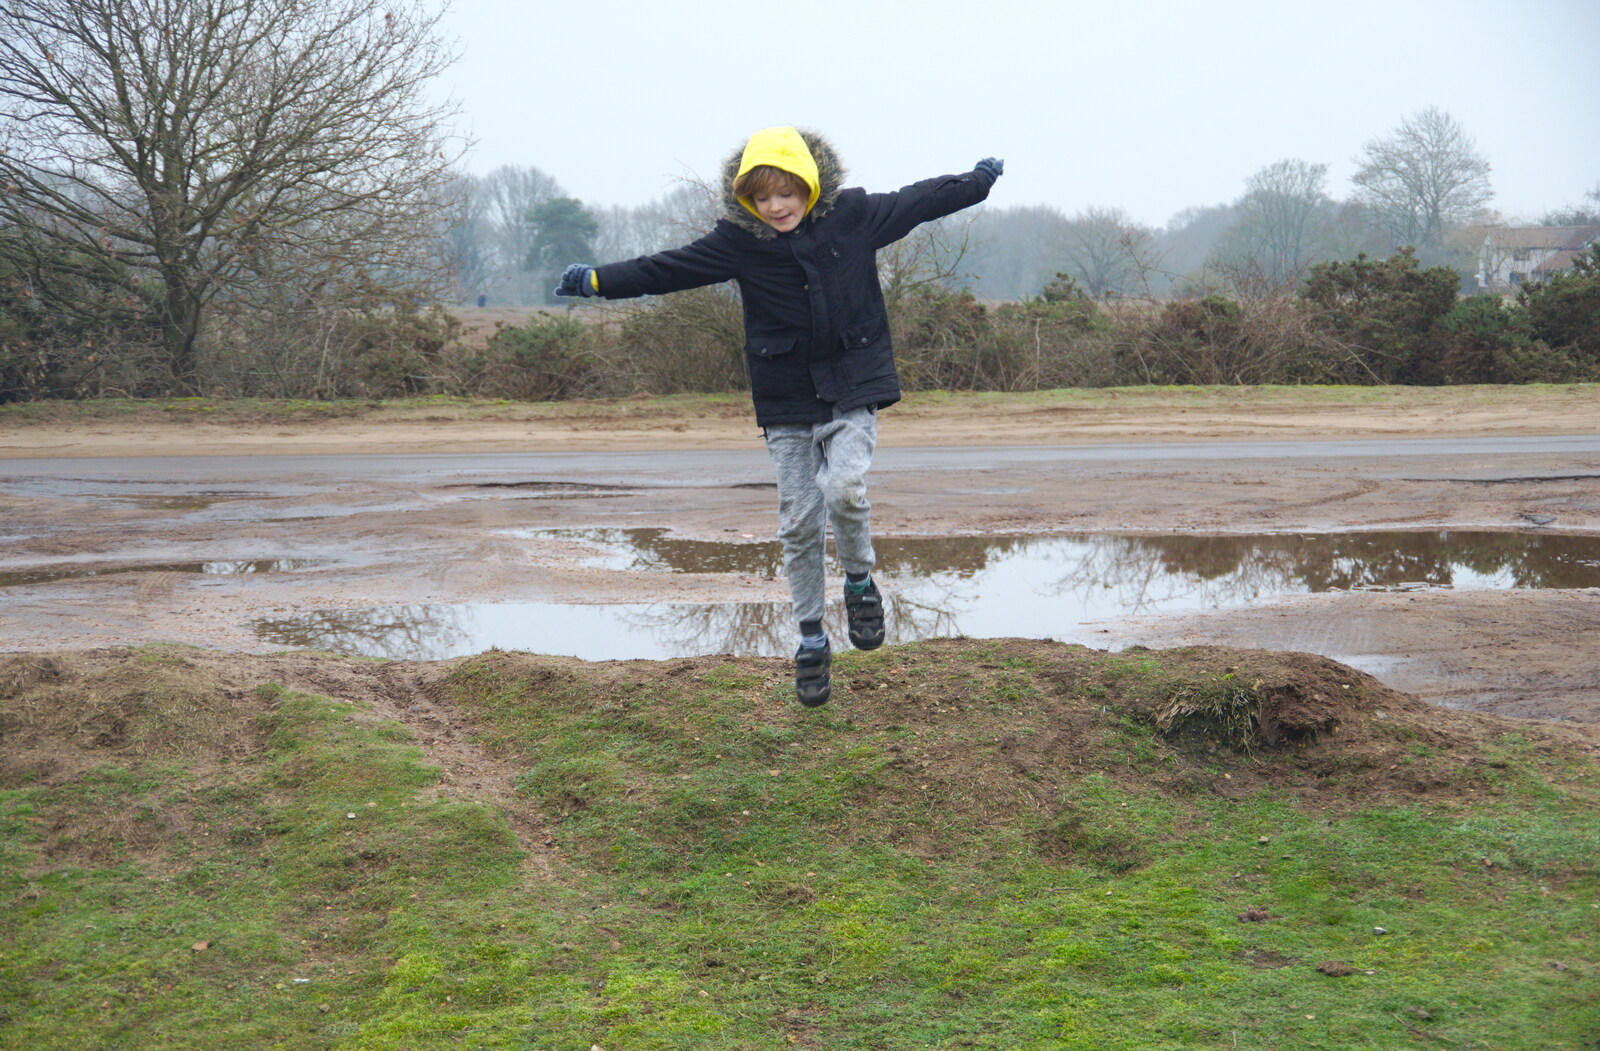 Harry leaps about from New Year's Day on the Ling, Wortham, Suffolk - 1st January 2020